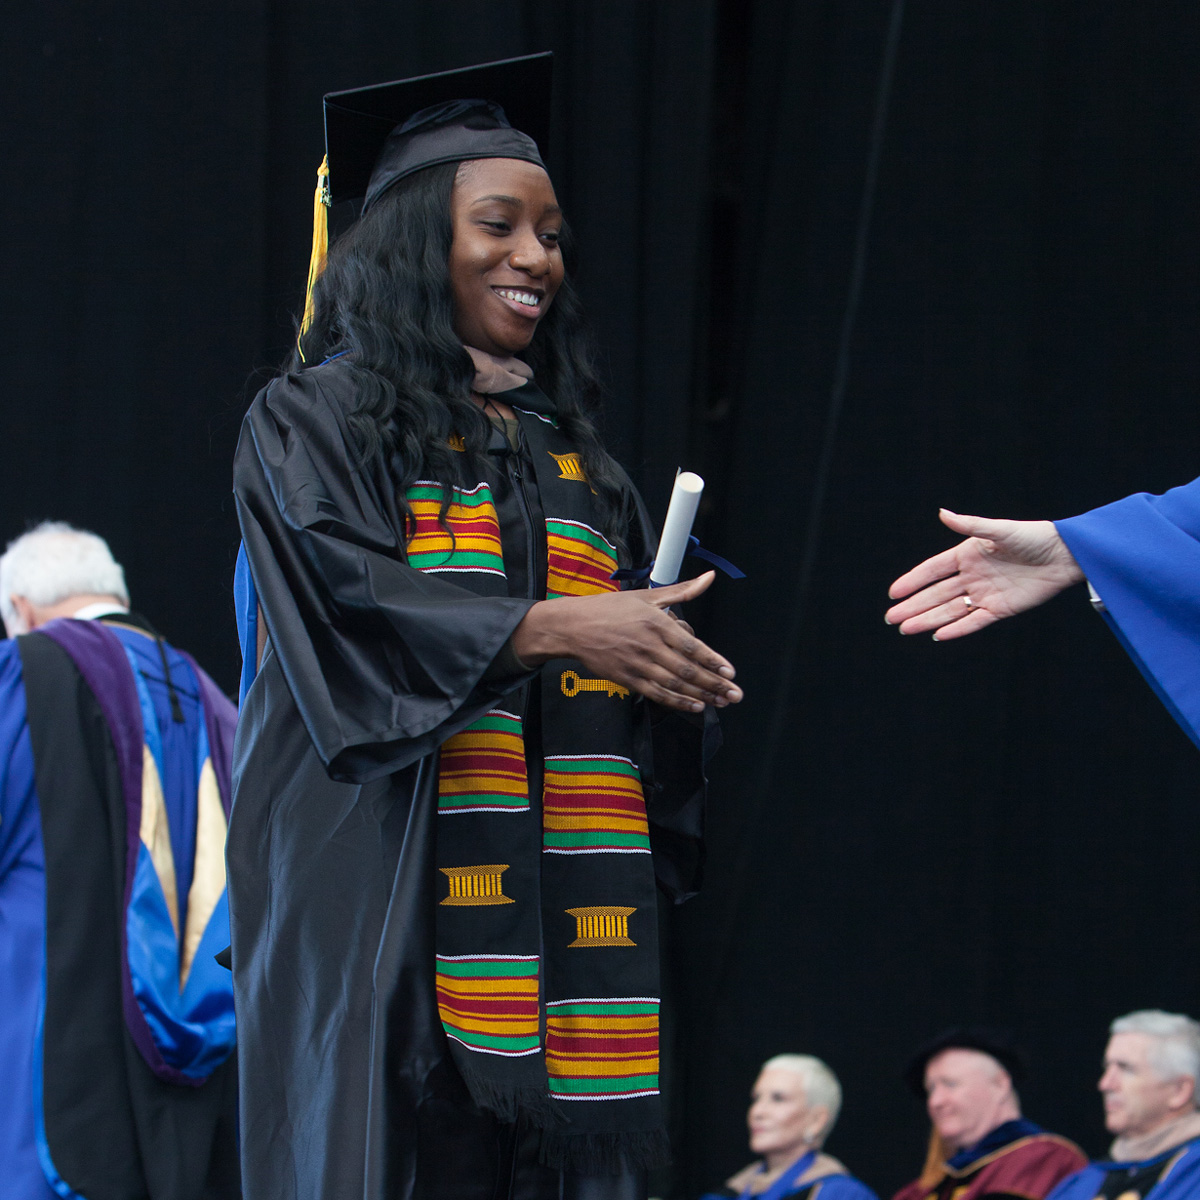 Brittani Cesar preparing to shake an administrator's hand while crossing the stage at Commencement.